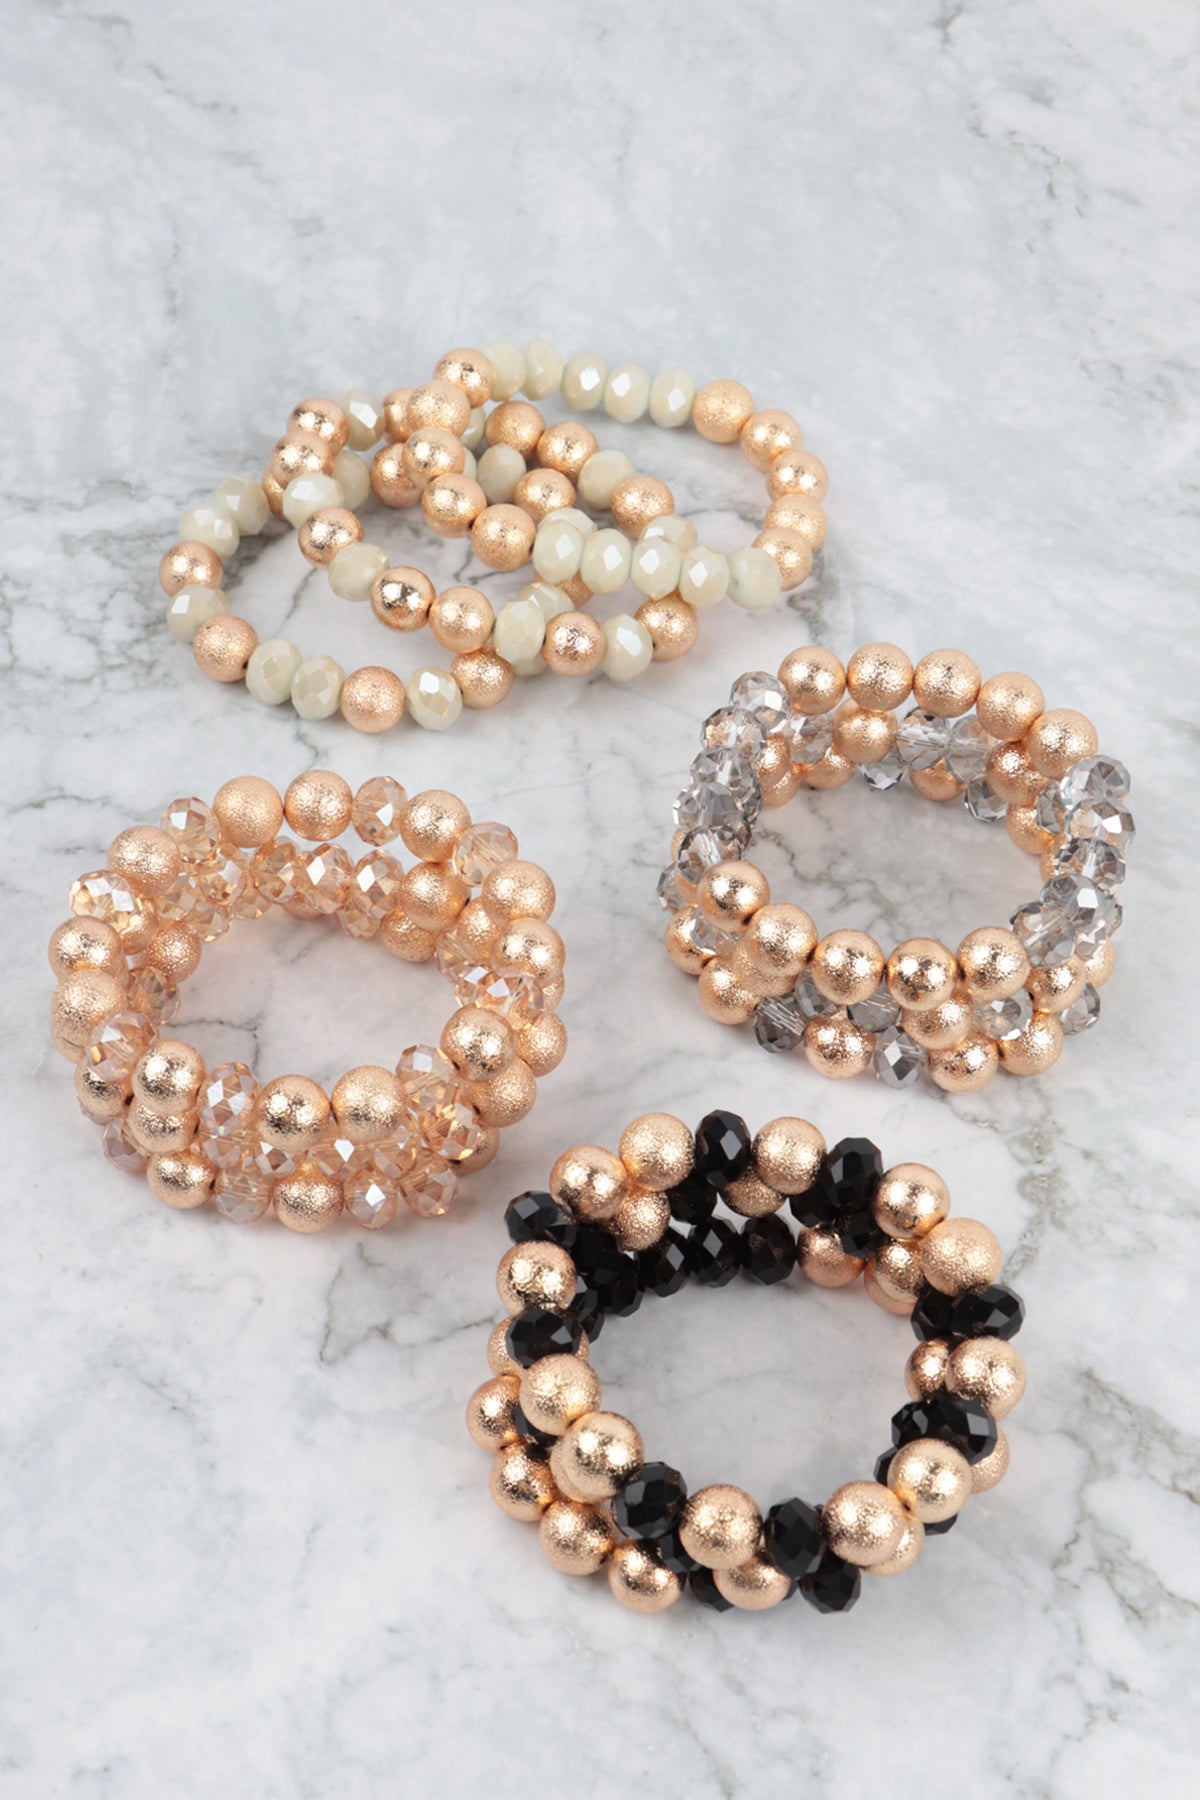 3 LINES STACKABLE TEXTURED CCB AND RONDELLE BEADS BRACELET